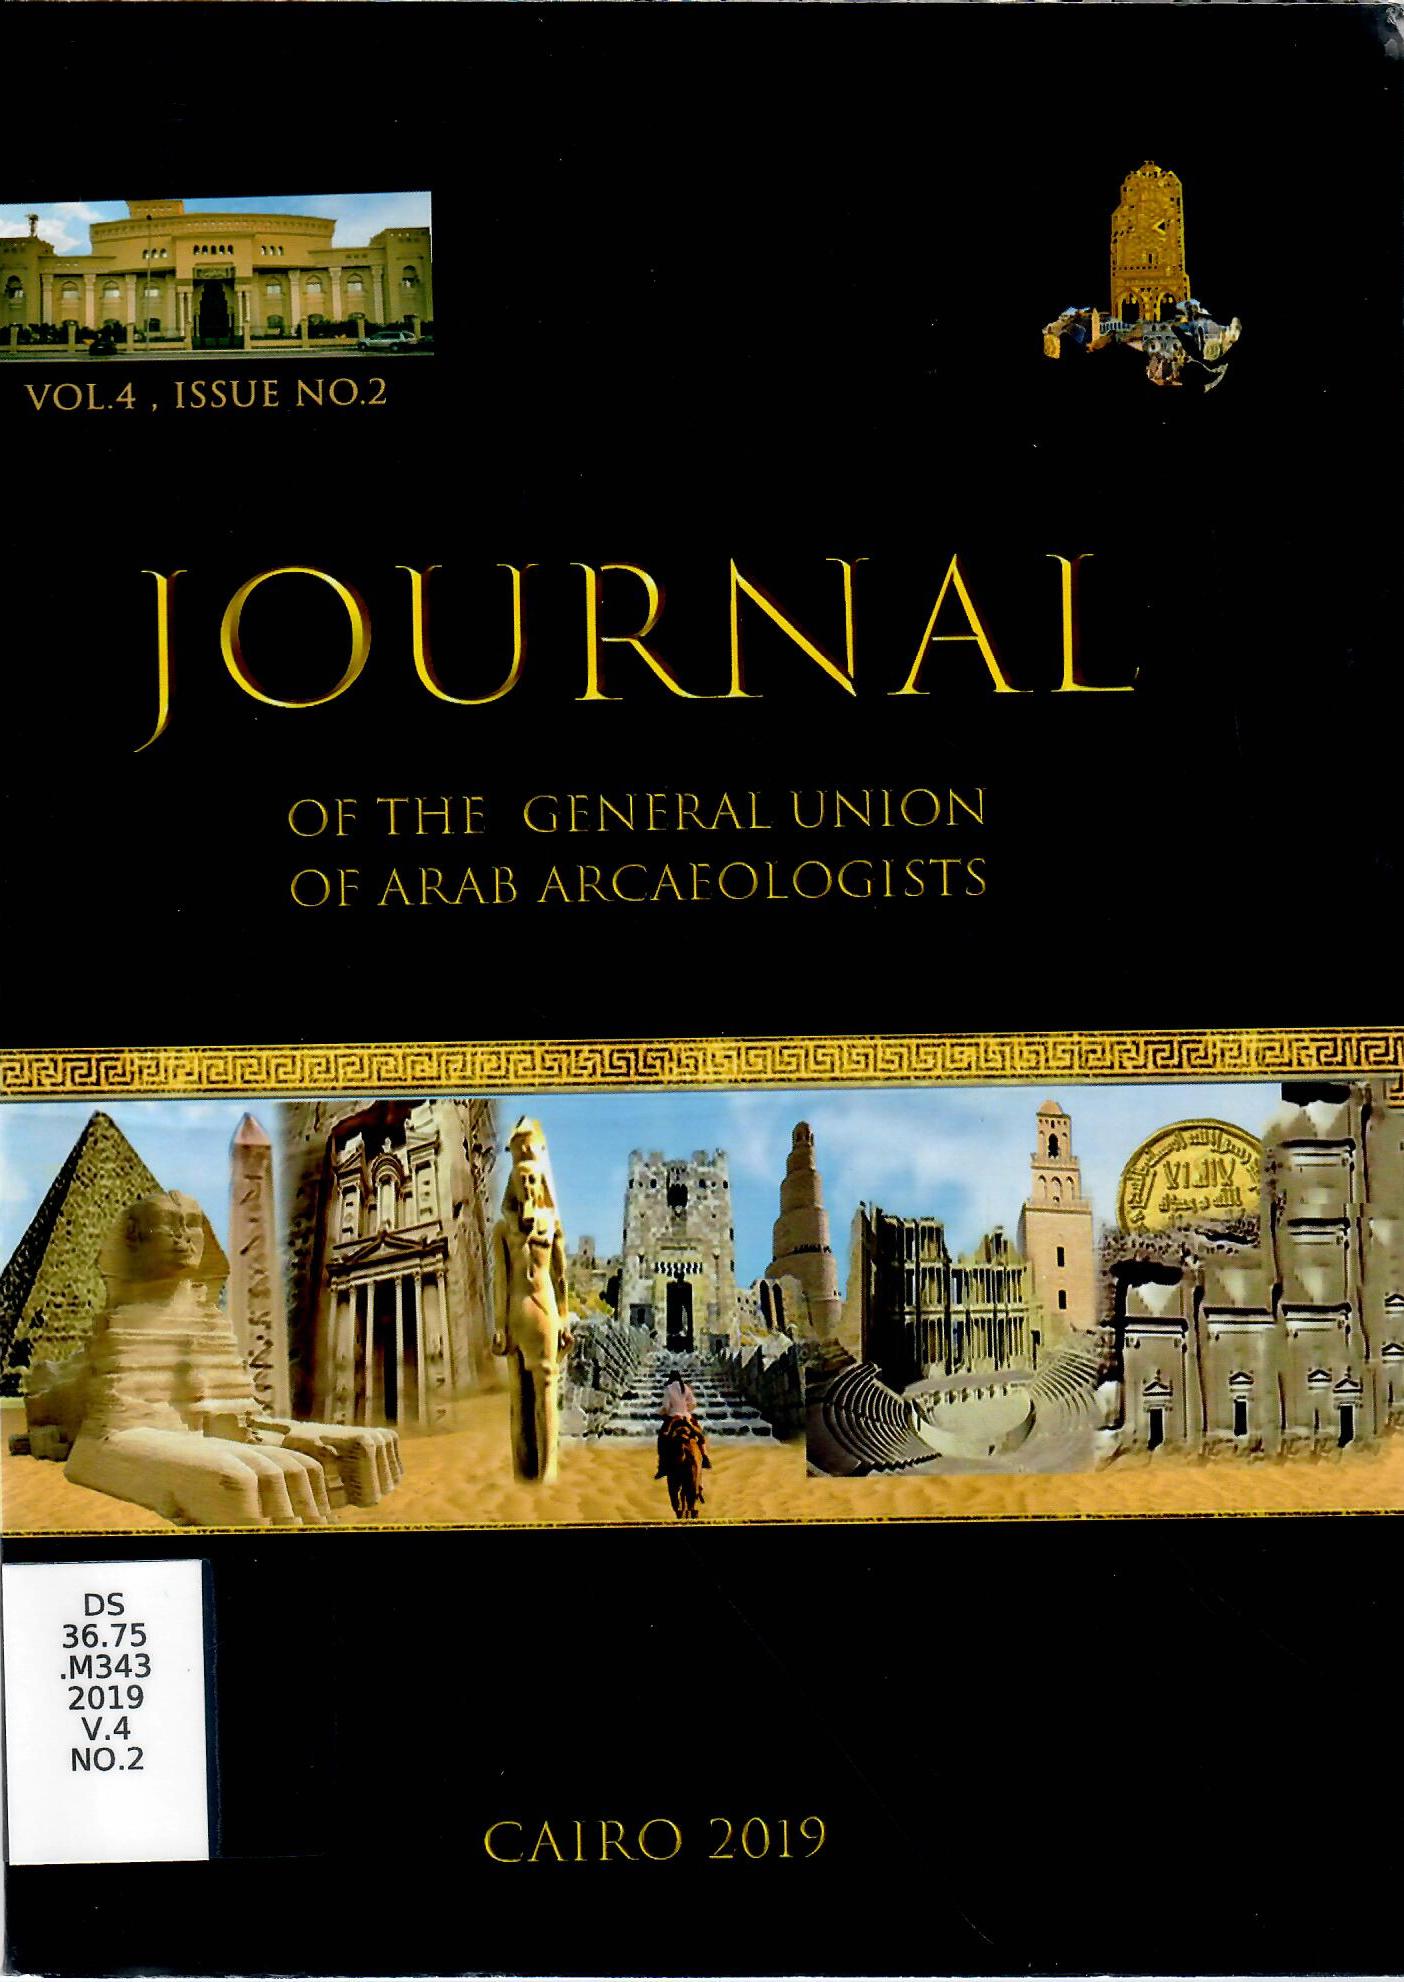 JOURNAL OF THE GENERAL UNION OF ARAB ARCAEOLOGISTS VOL 4 NO 2